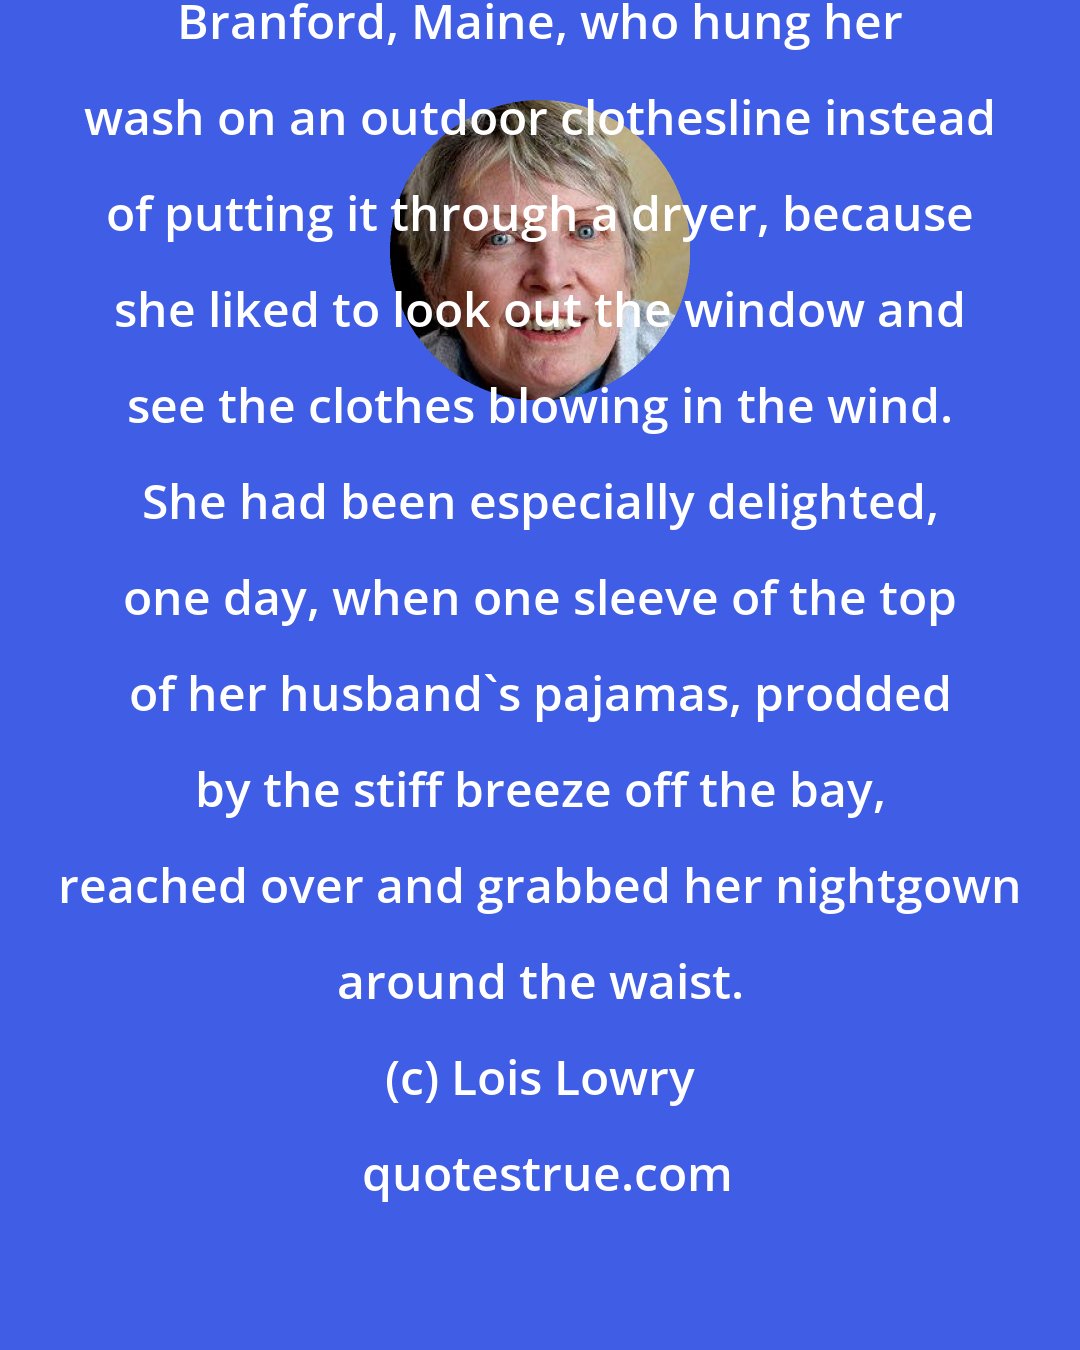 Lois Lowry: She was the only doctor's wife in Branford, Maine, who hung her wash on an outdoor clothesline instead of putting it through a dryer, because she liked to look out the window and see the clothes blowing in the wind. She had been especially delighted, one day, when one sleeve of the top of her husband's pajamas, prodded by the stiff breeze off the bay, reached over and grabbed her nightgown around the waist.